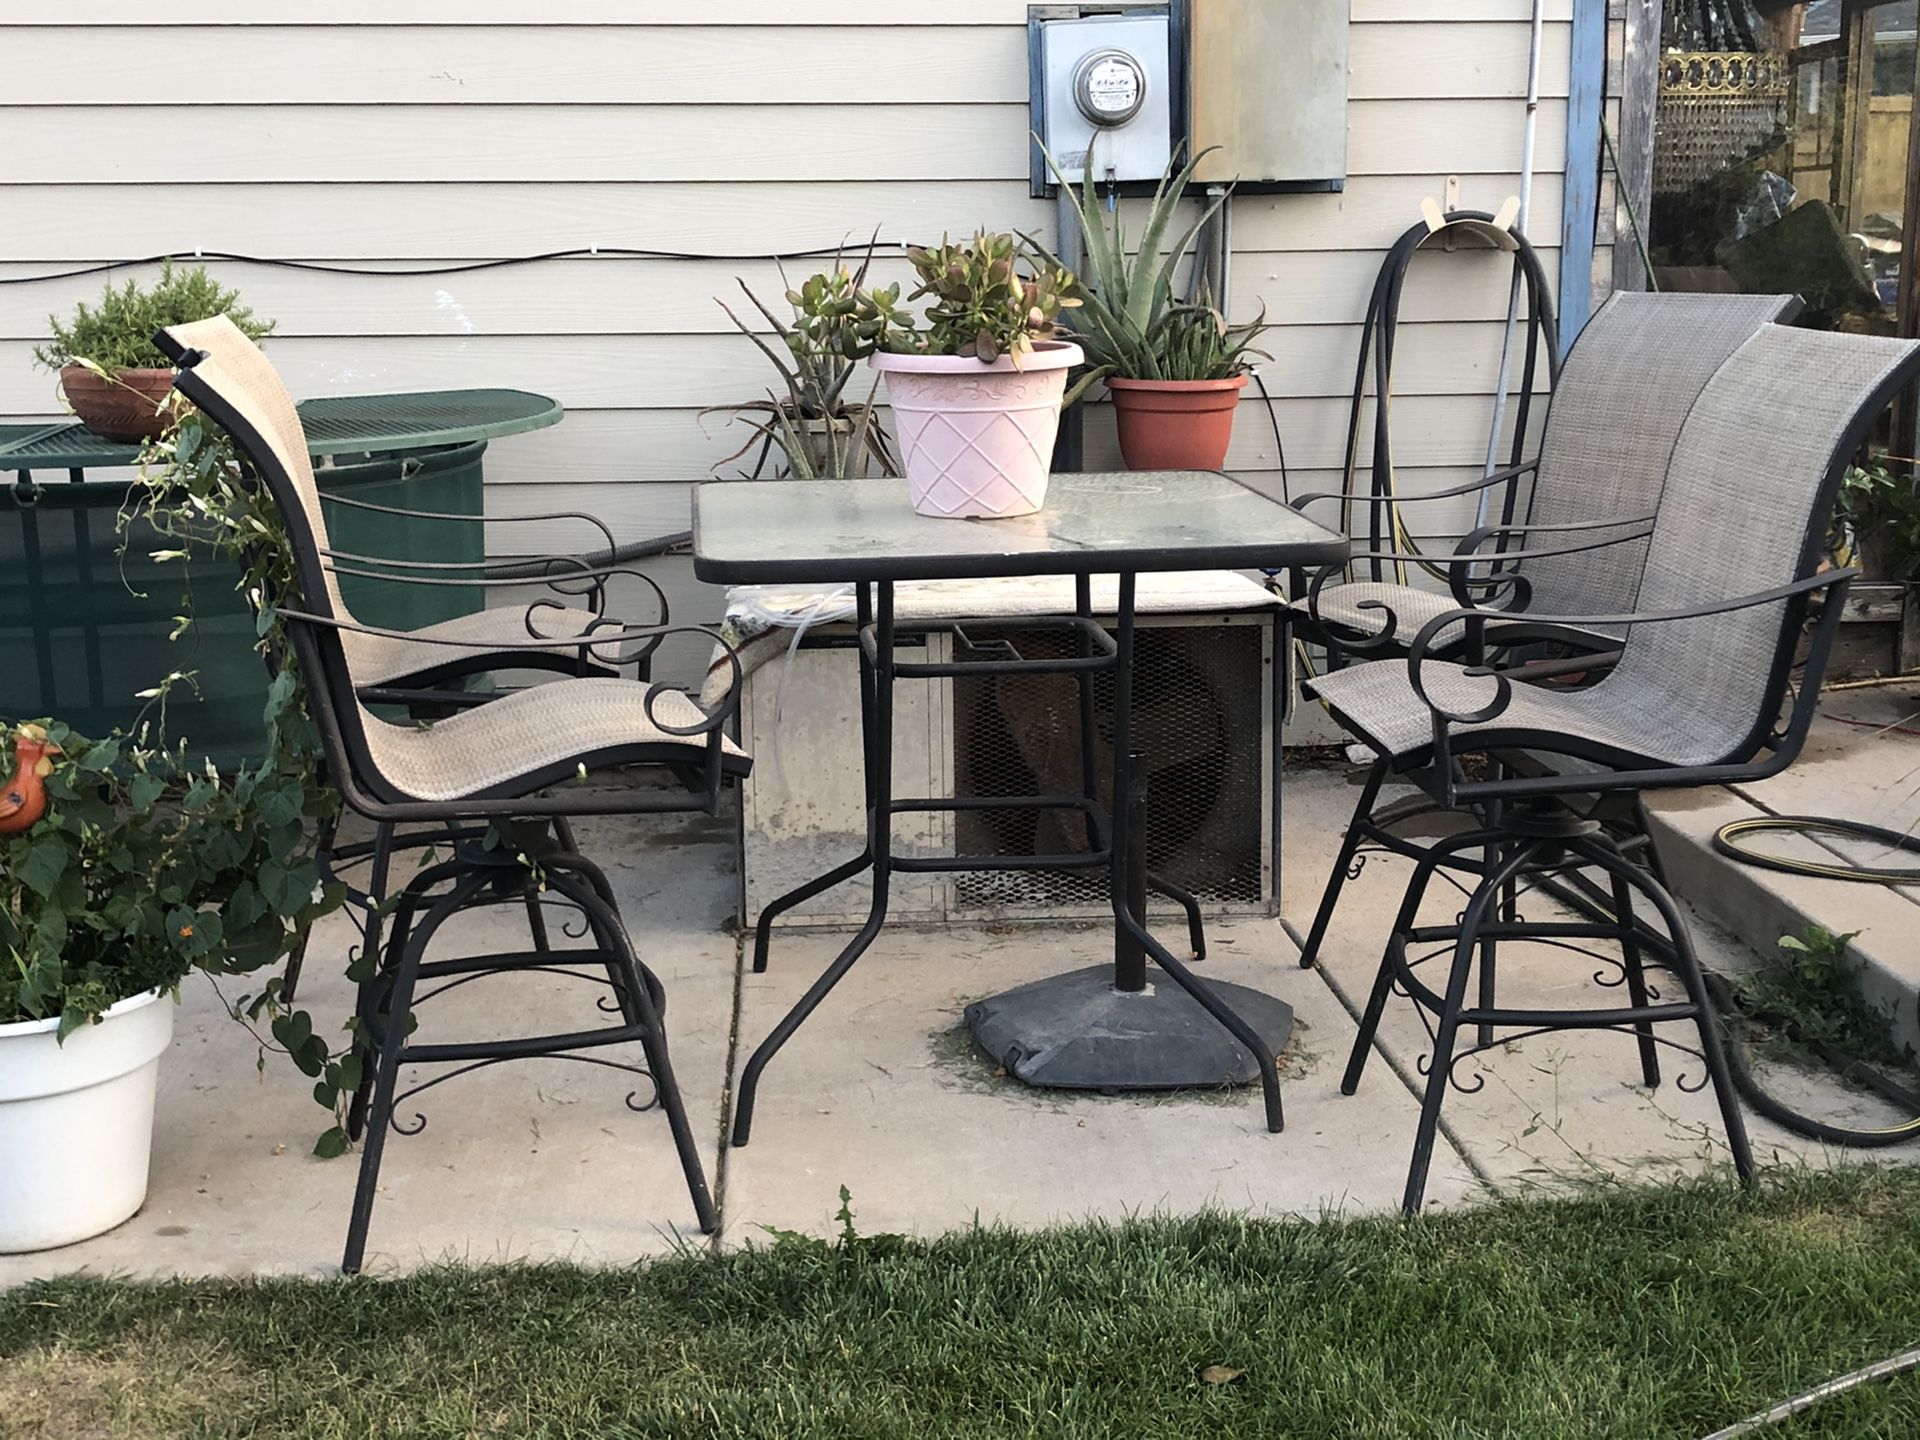 Patio table and swirling chairs